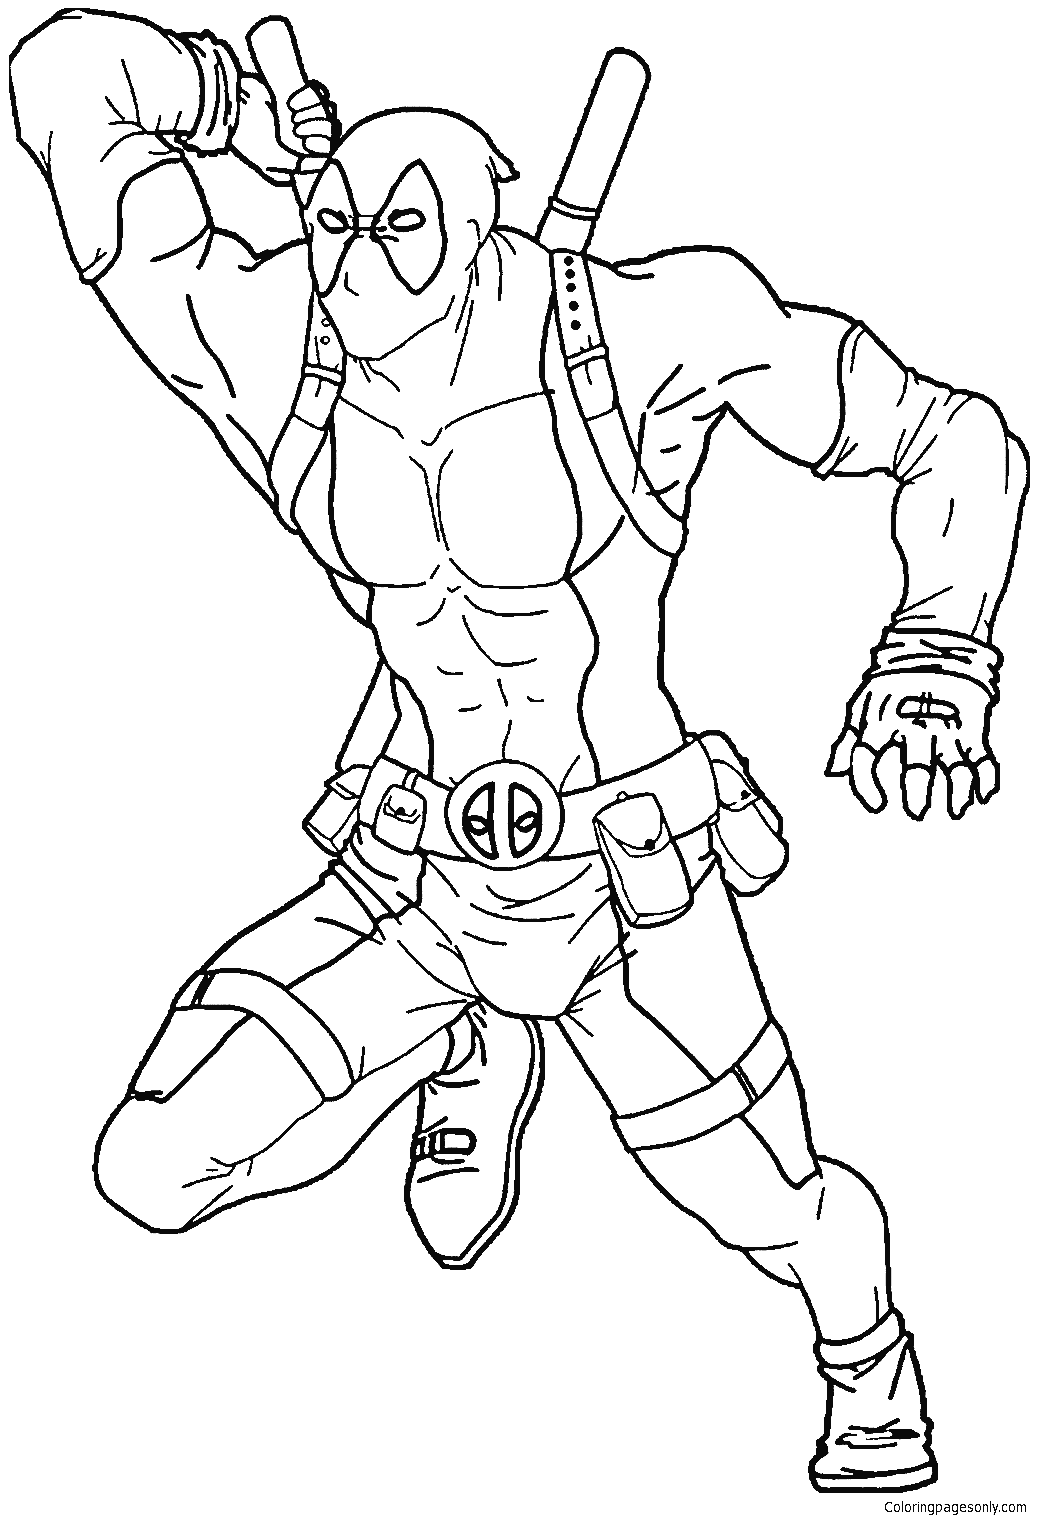 Deadpool 5 Coloring Pages